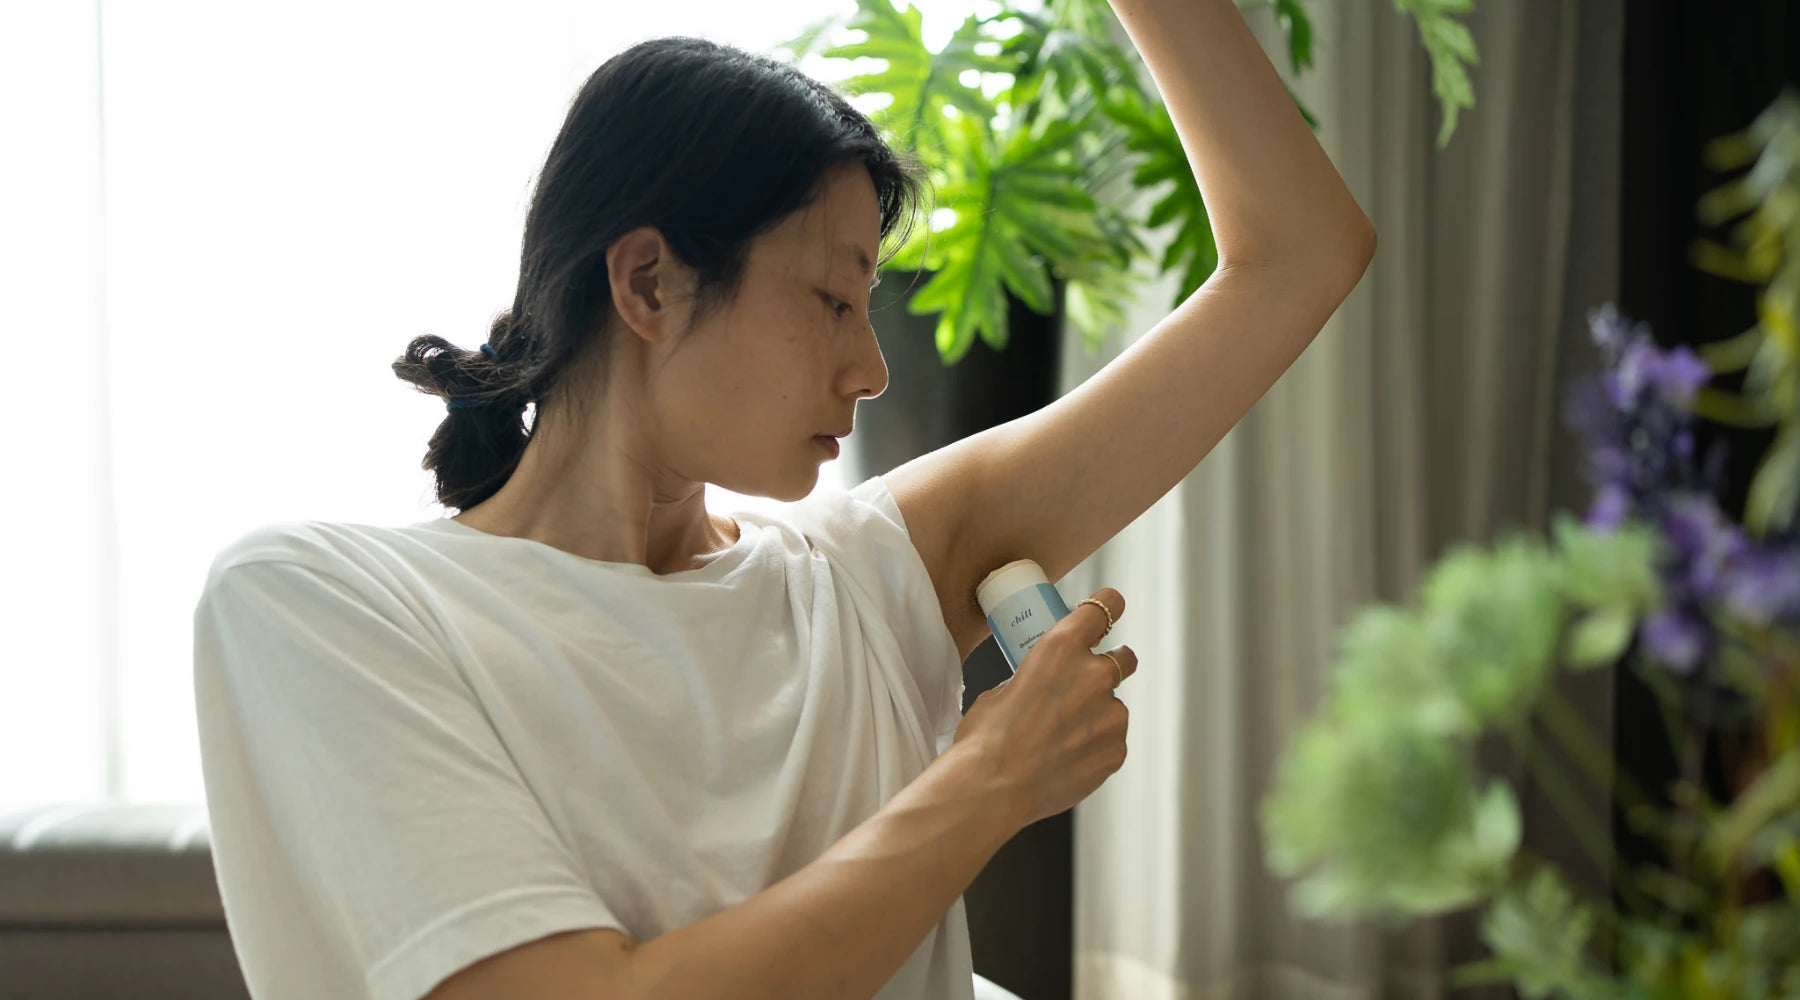 Does Deodorant Expire? How Long Does it Last?